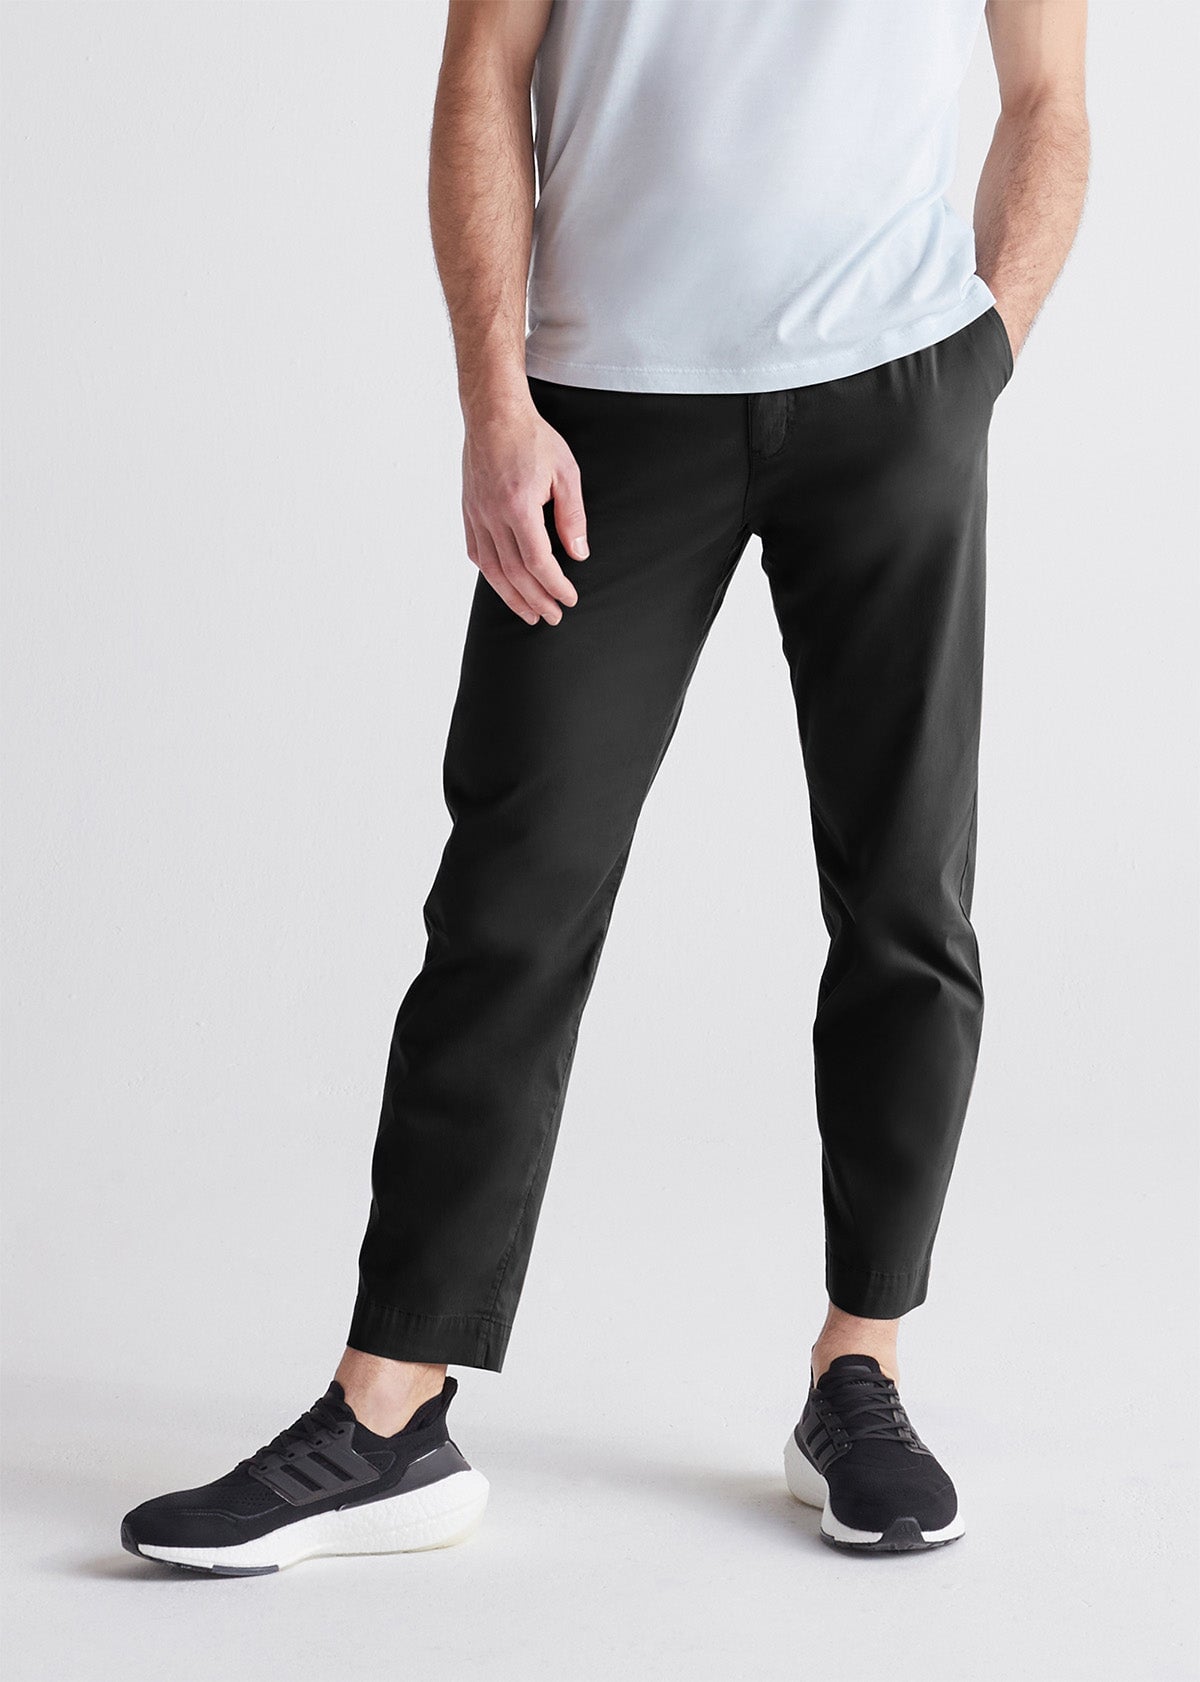 Men's Charcoal Relaxed Fit Stretch Dress Pant